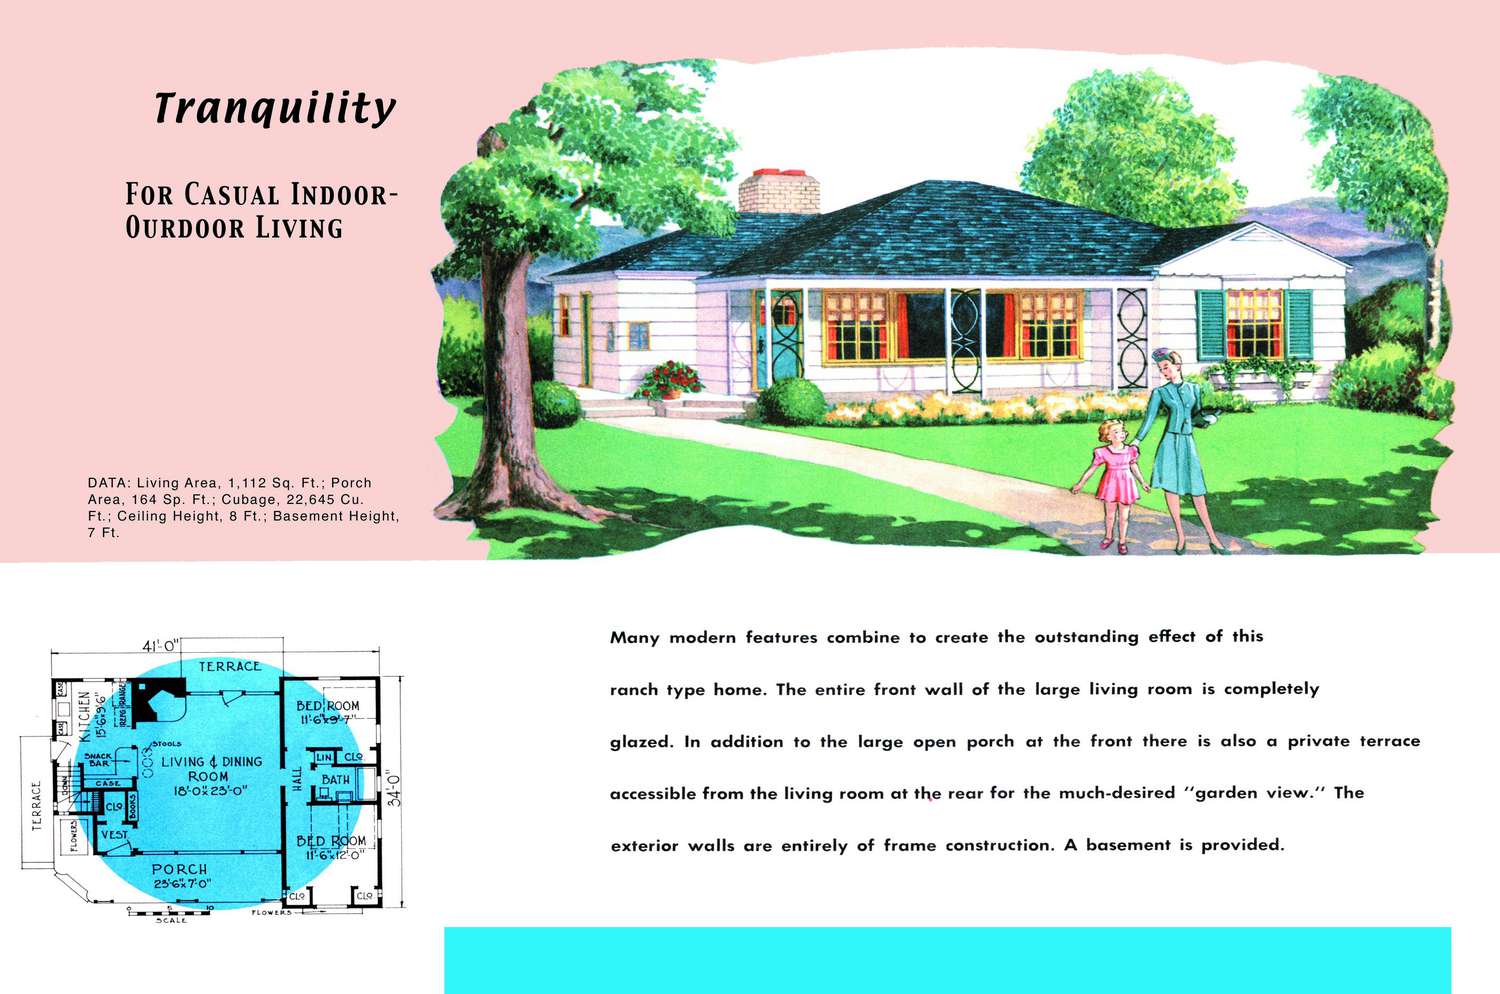 1950s floor plan and rendering of ranch-style house called Tranquility